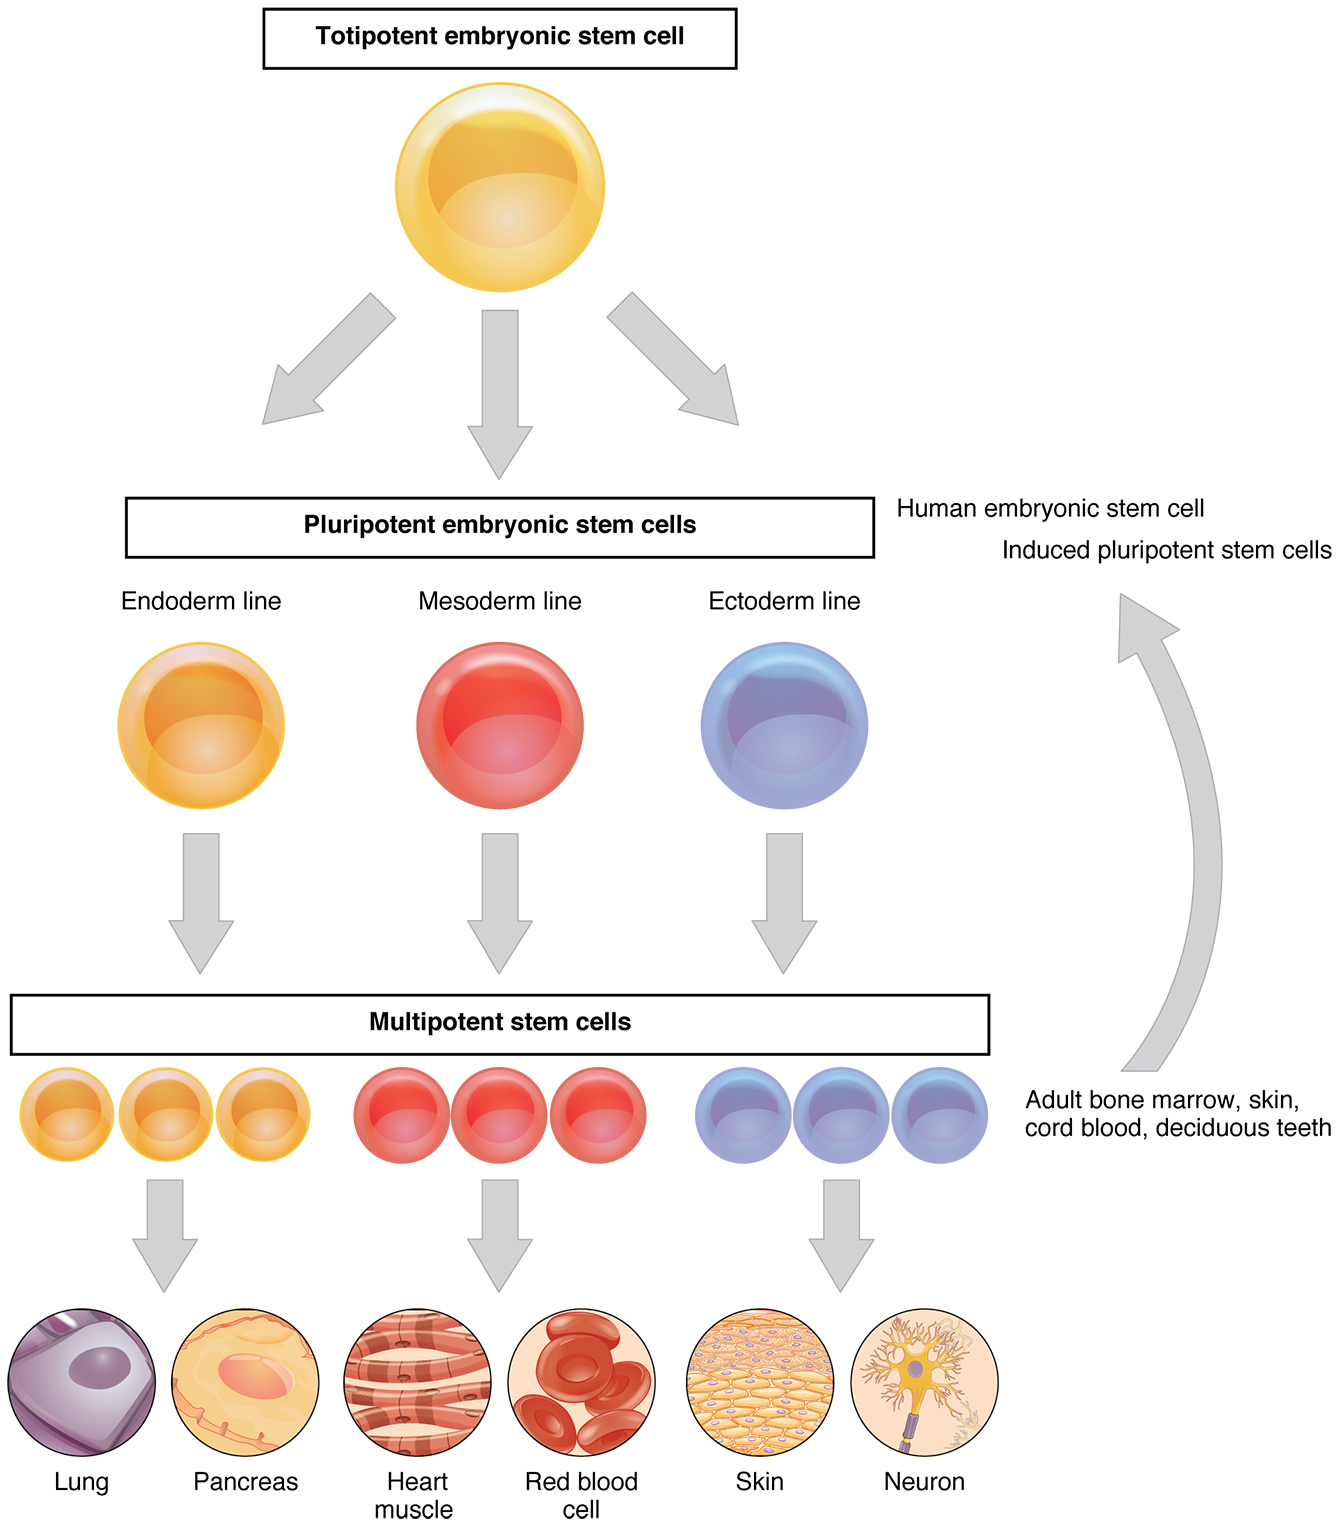 422_Feature_Stem_Cell_new.png